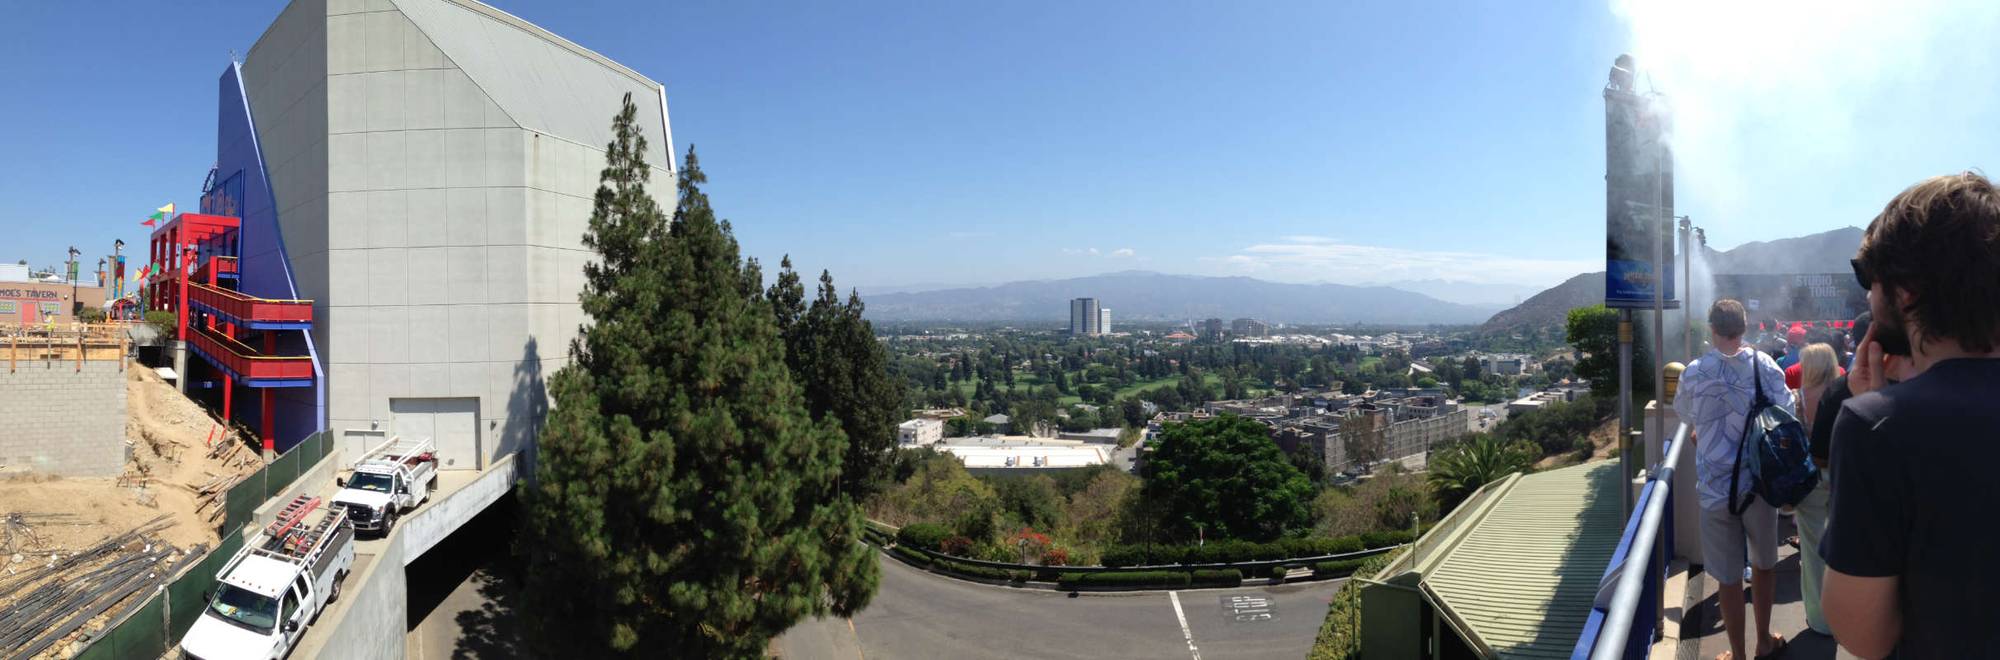 Panorama of the view over the park